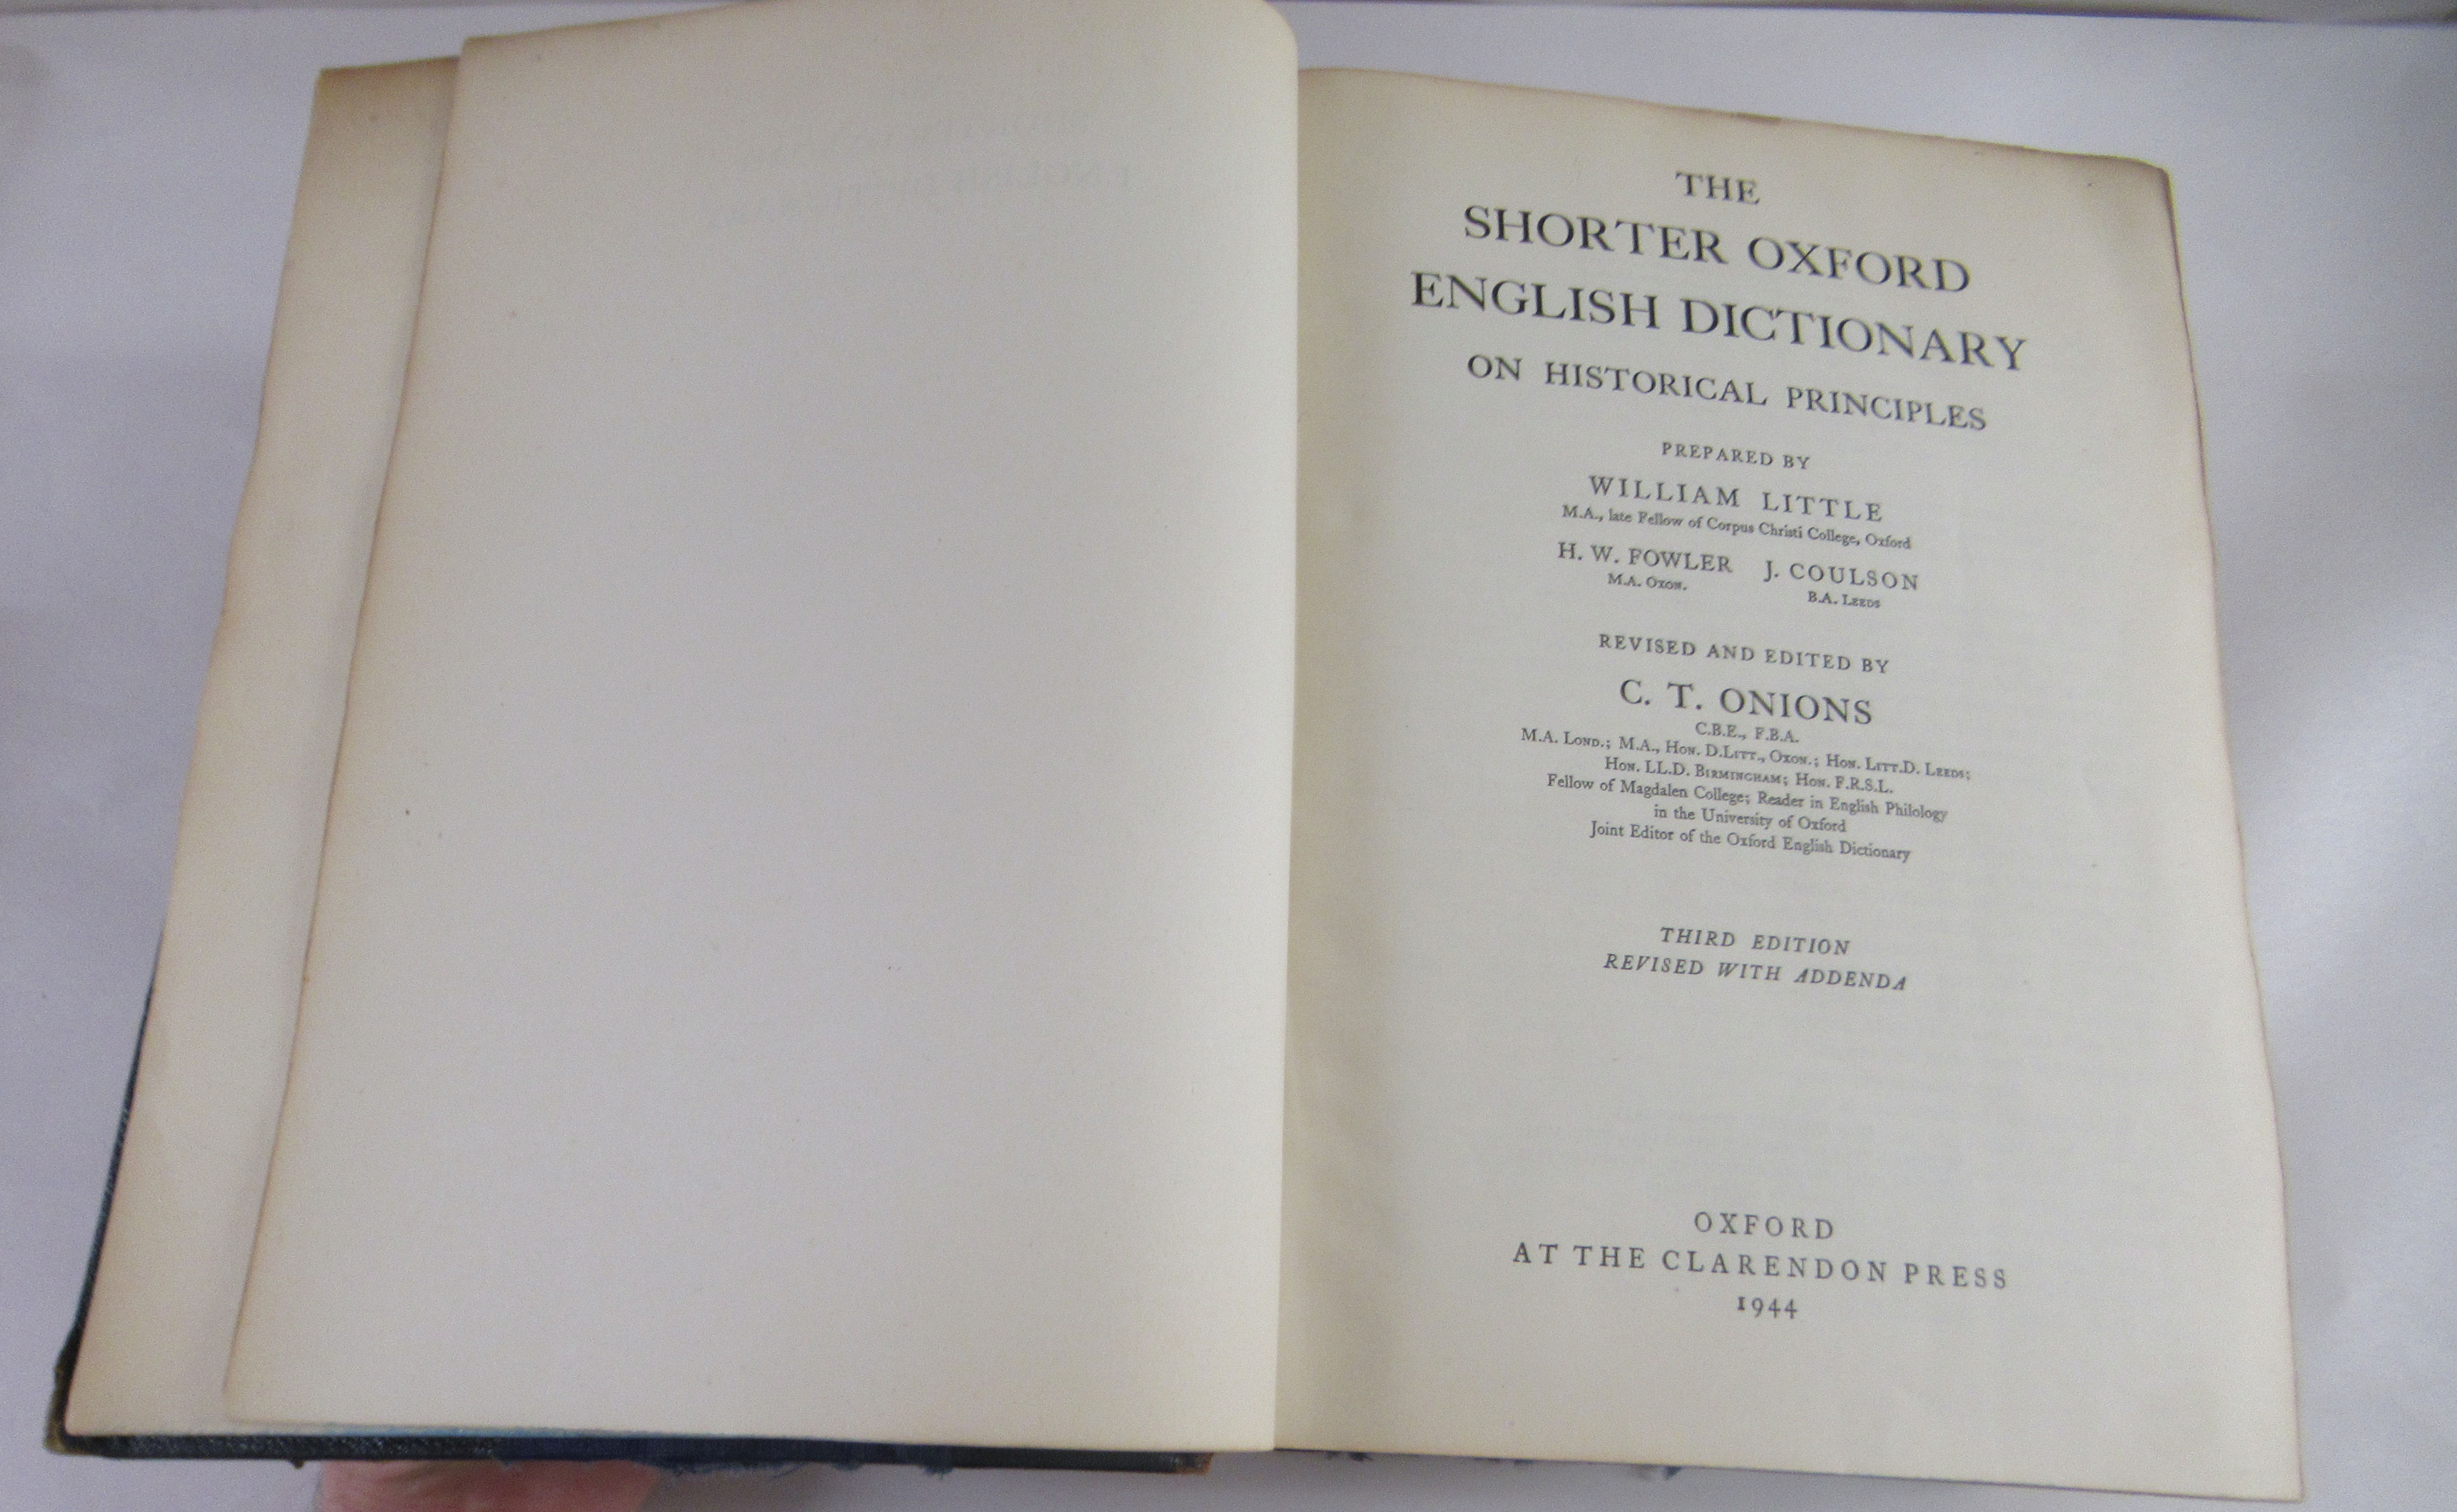 Book: 'The Shorter Oxford Dictionary'  3rd edition, revised with addenda published 1944 - Image 4 of 5